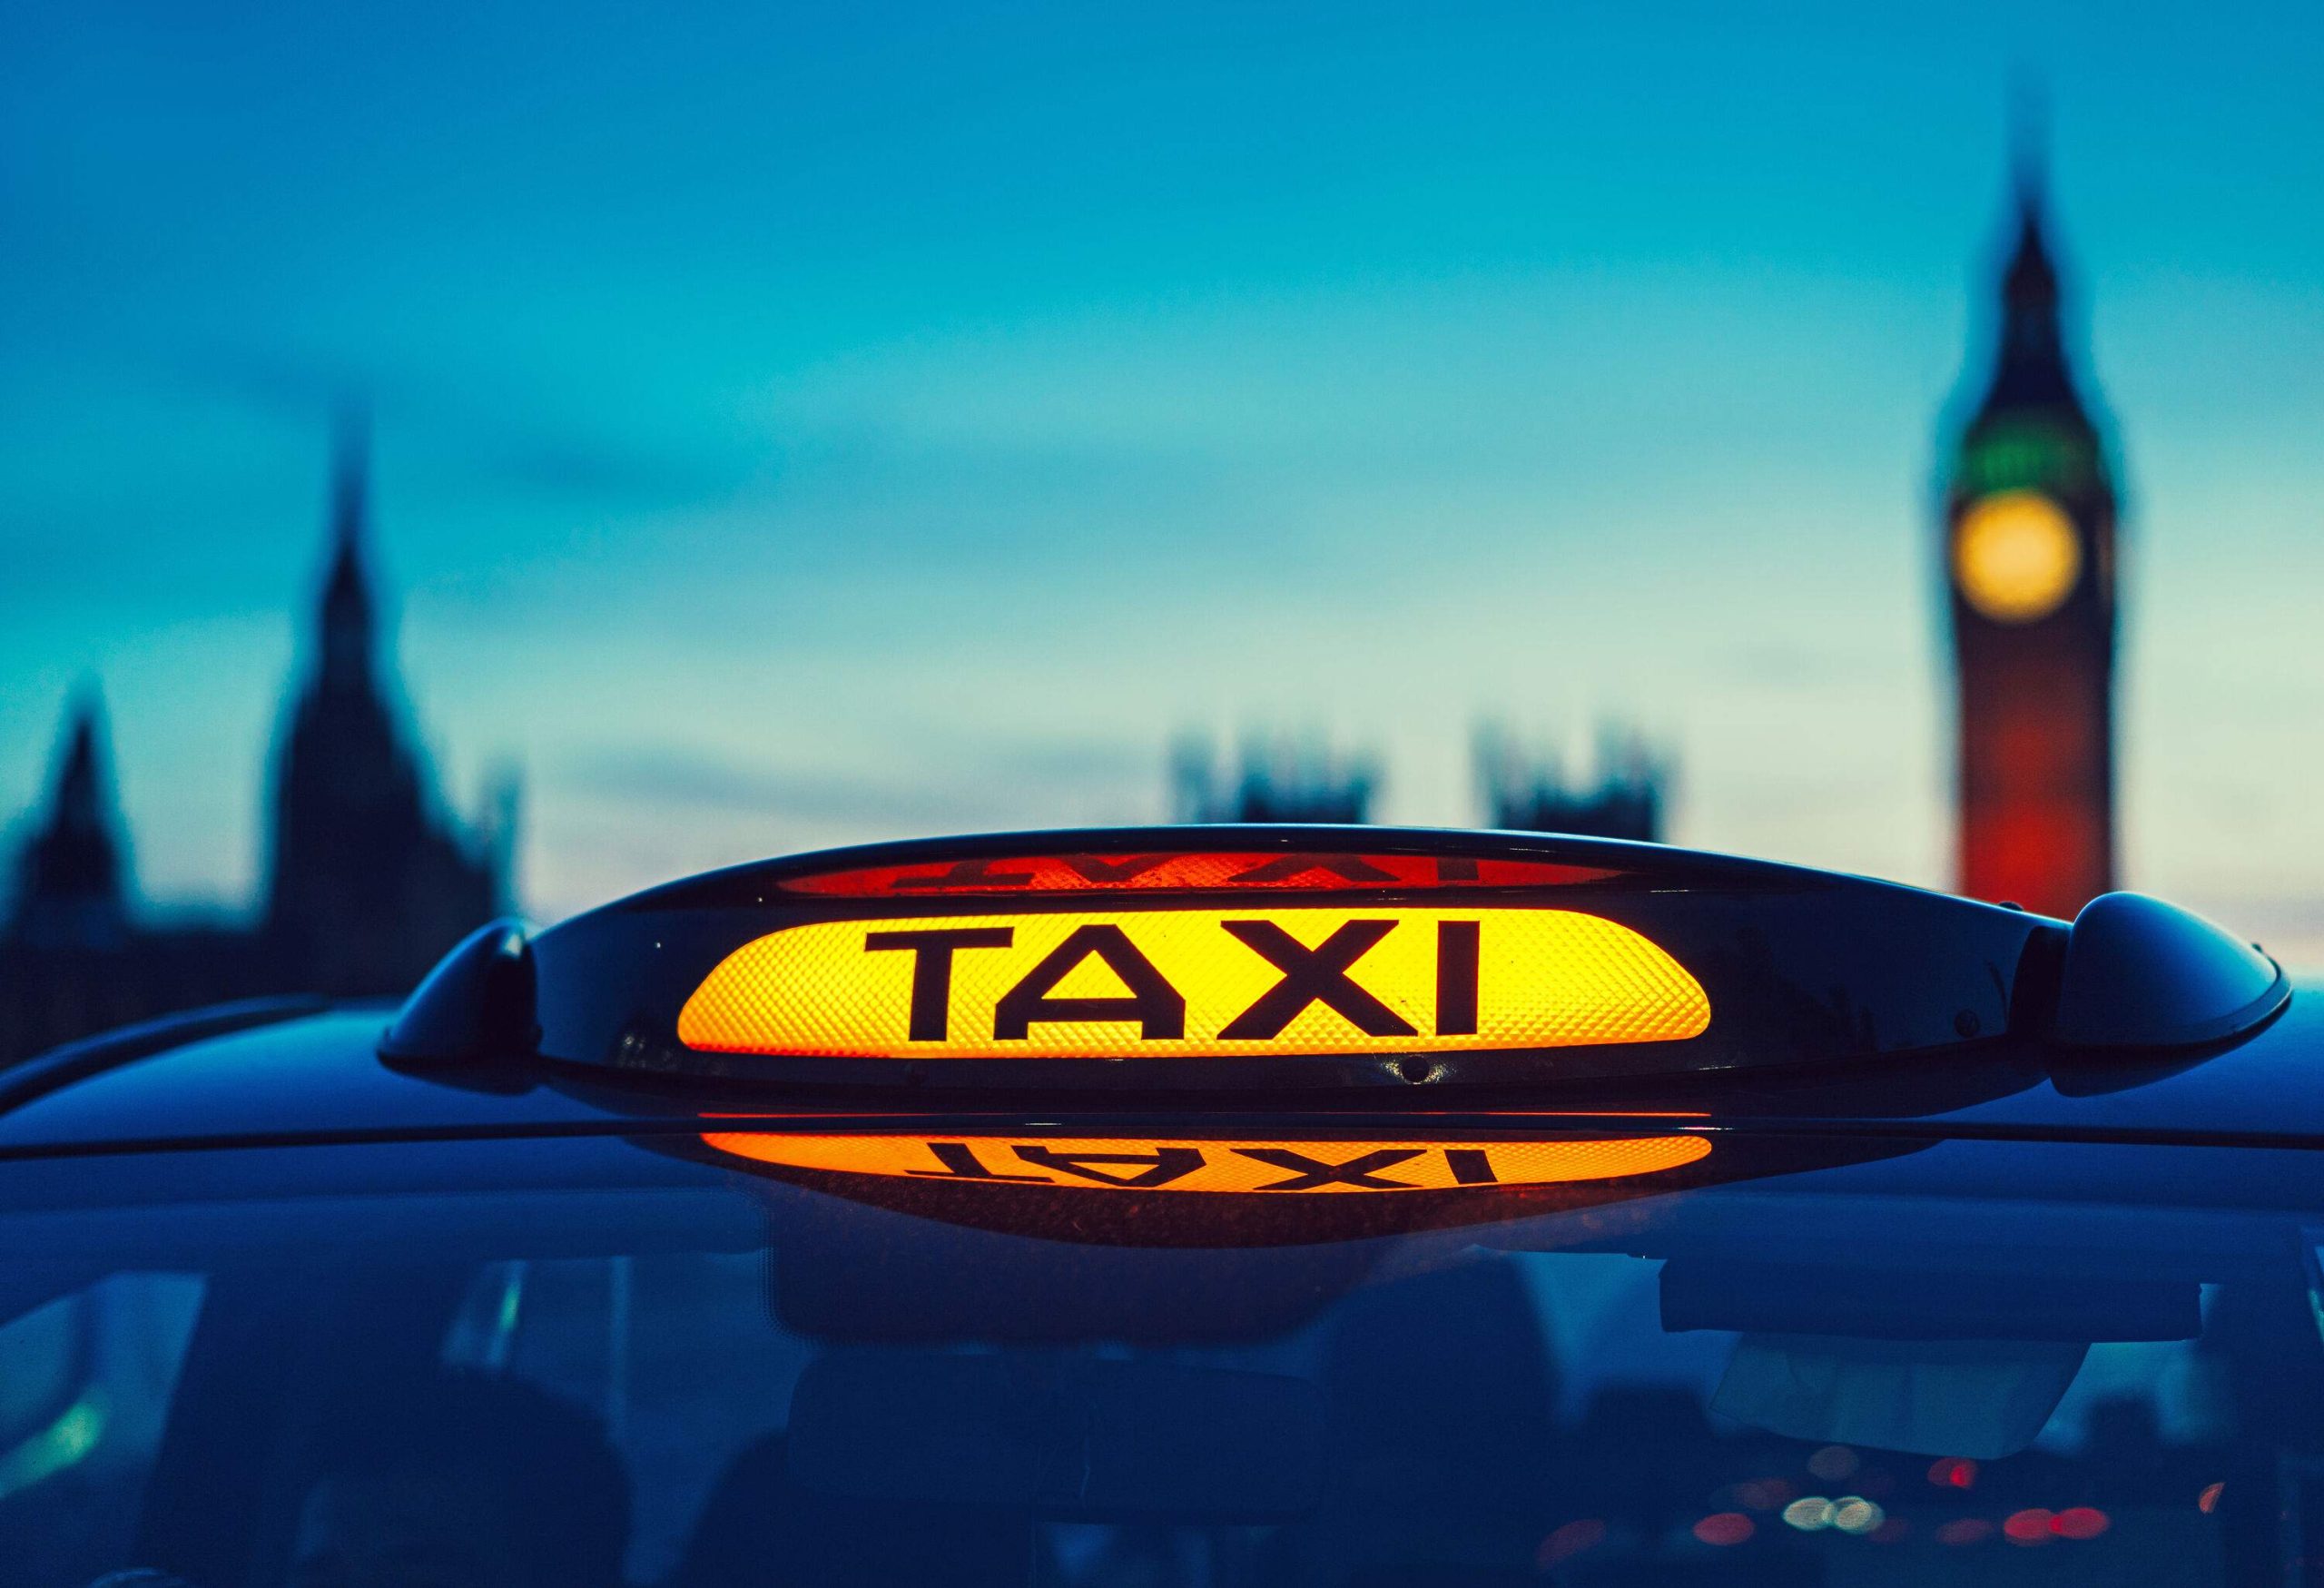 Close-up of an illuminated London taxi sign with a blurry image of Big Ben in the background.